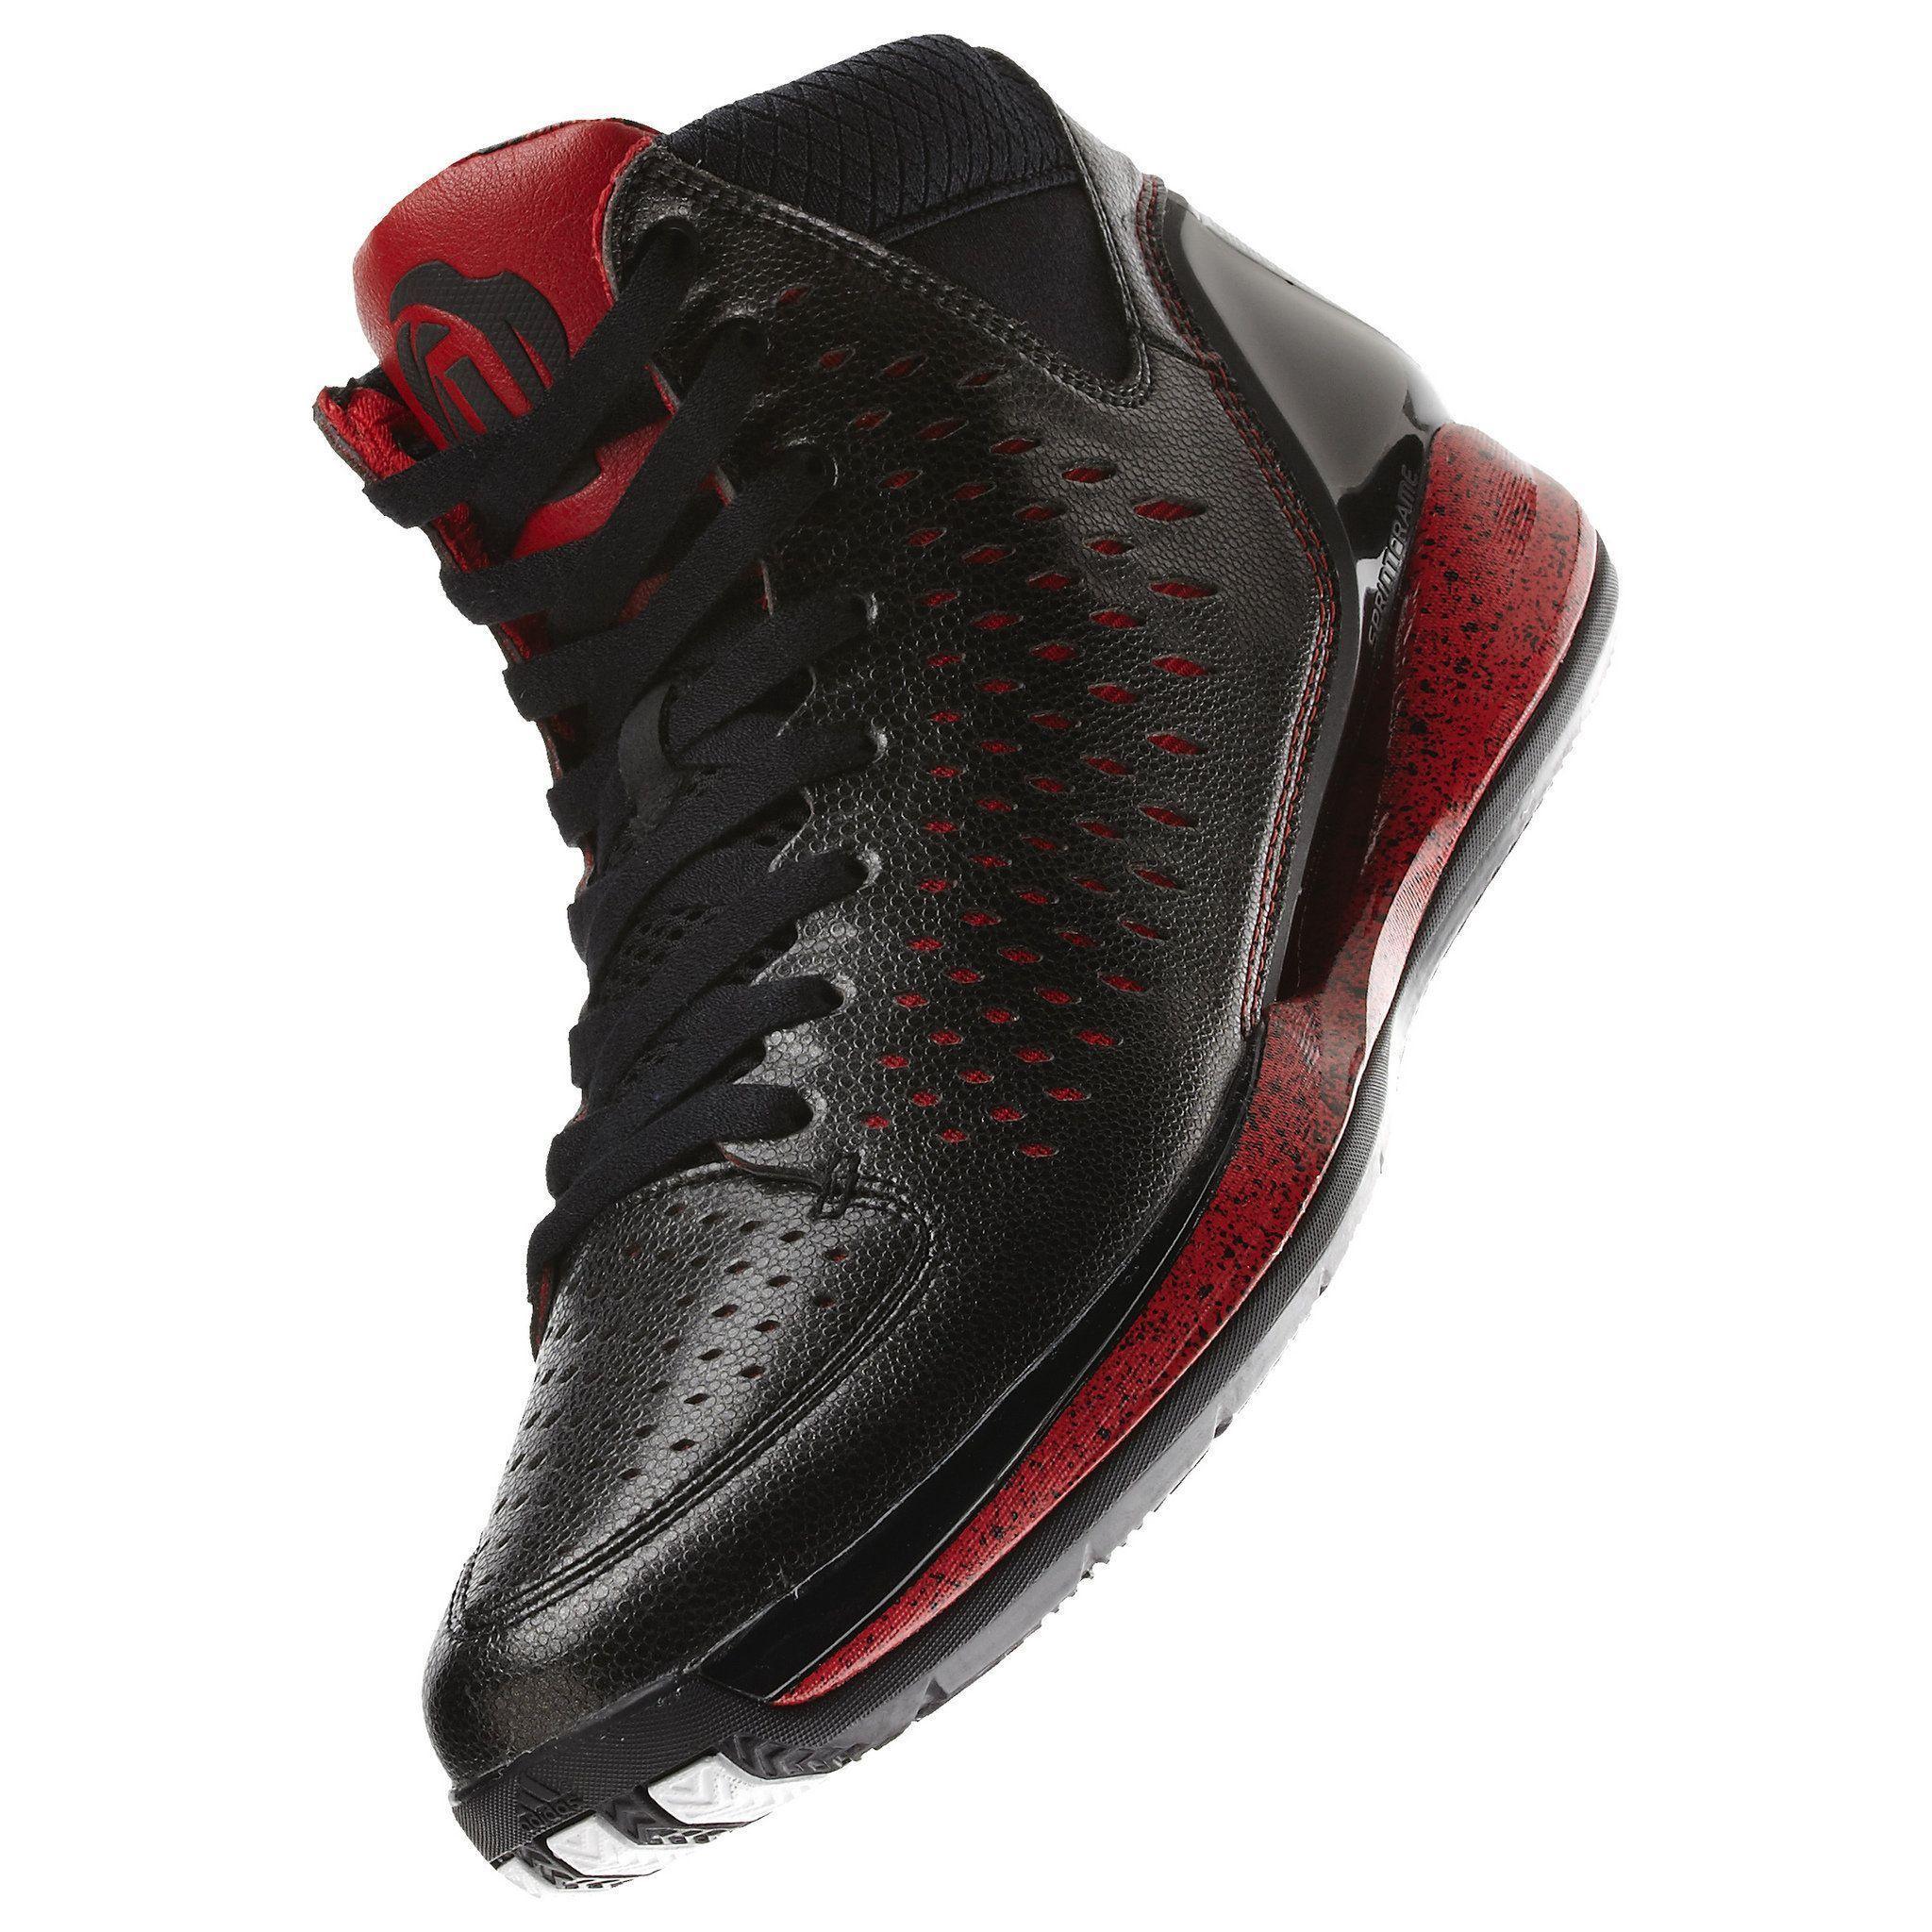 Adidas gets to the roots of Derrick Rose to produce shoe, logo